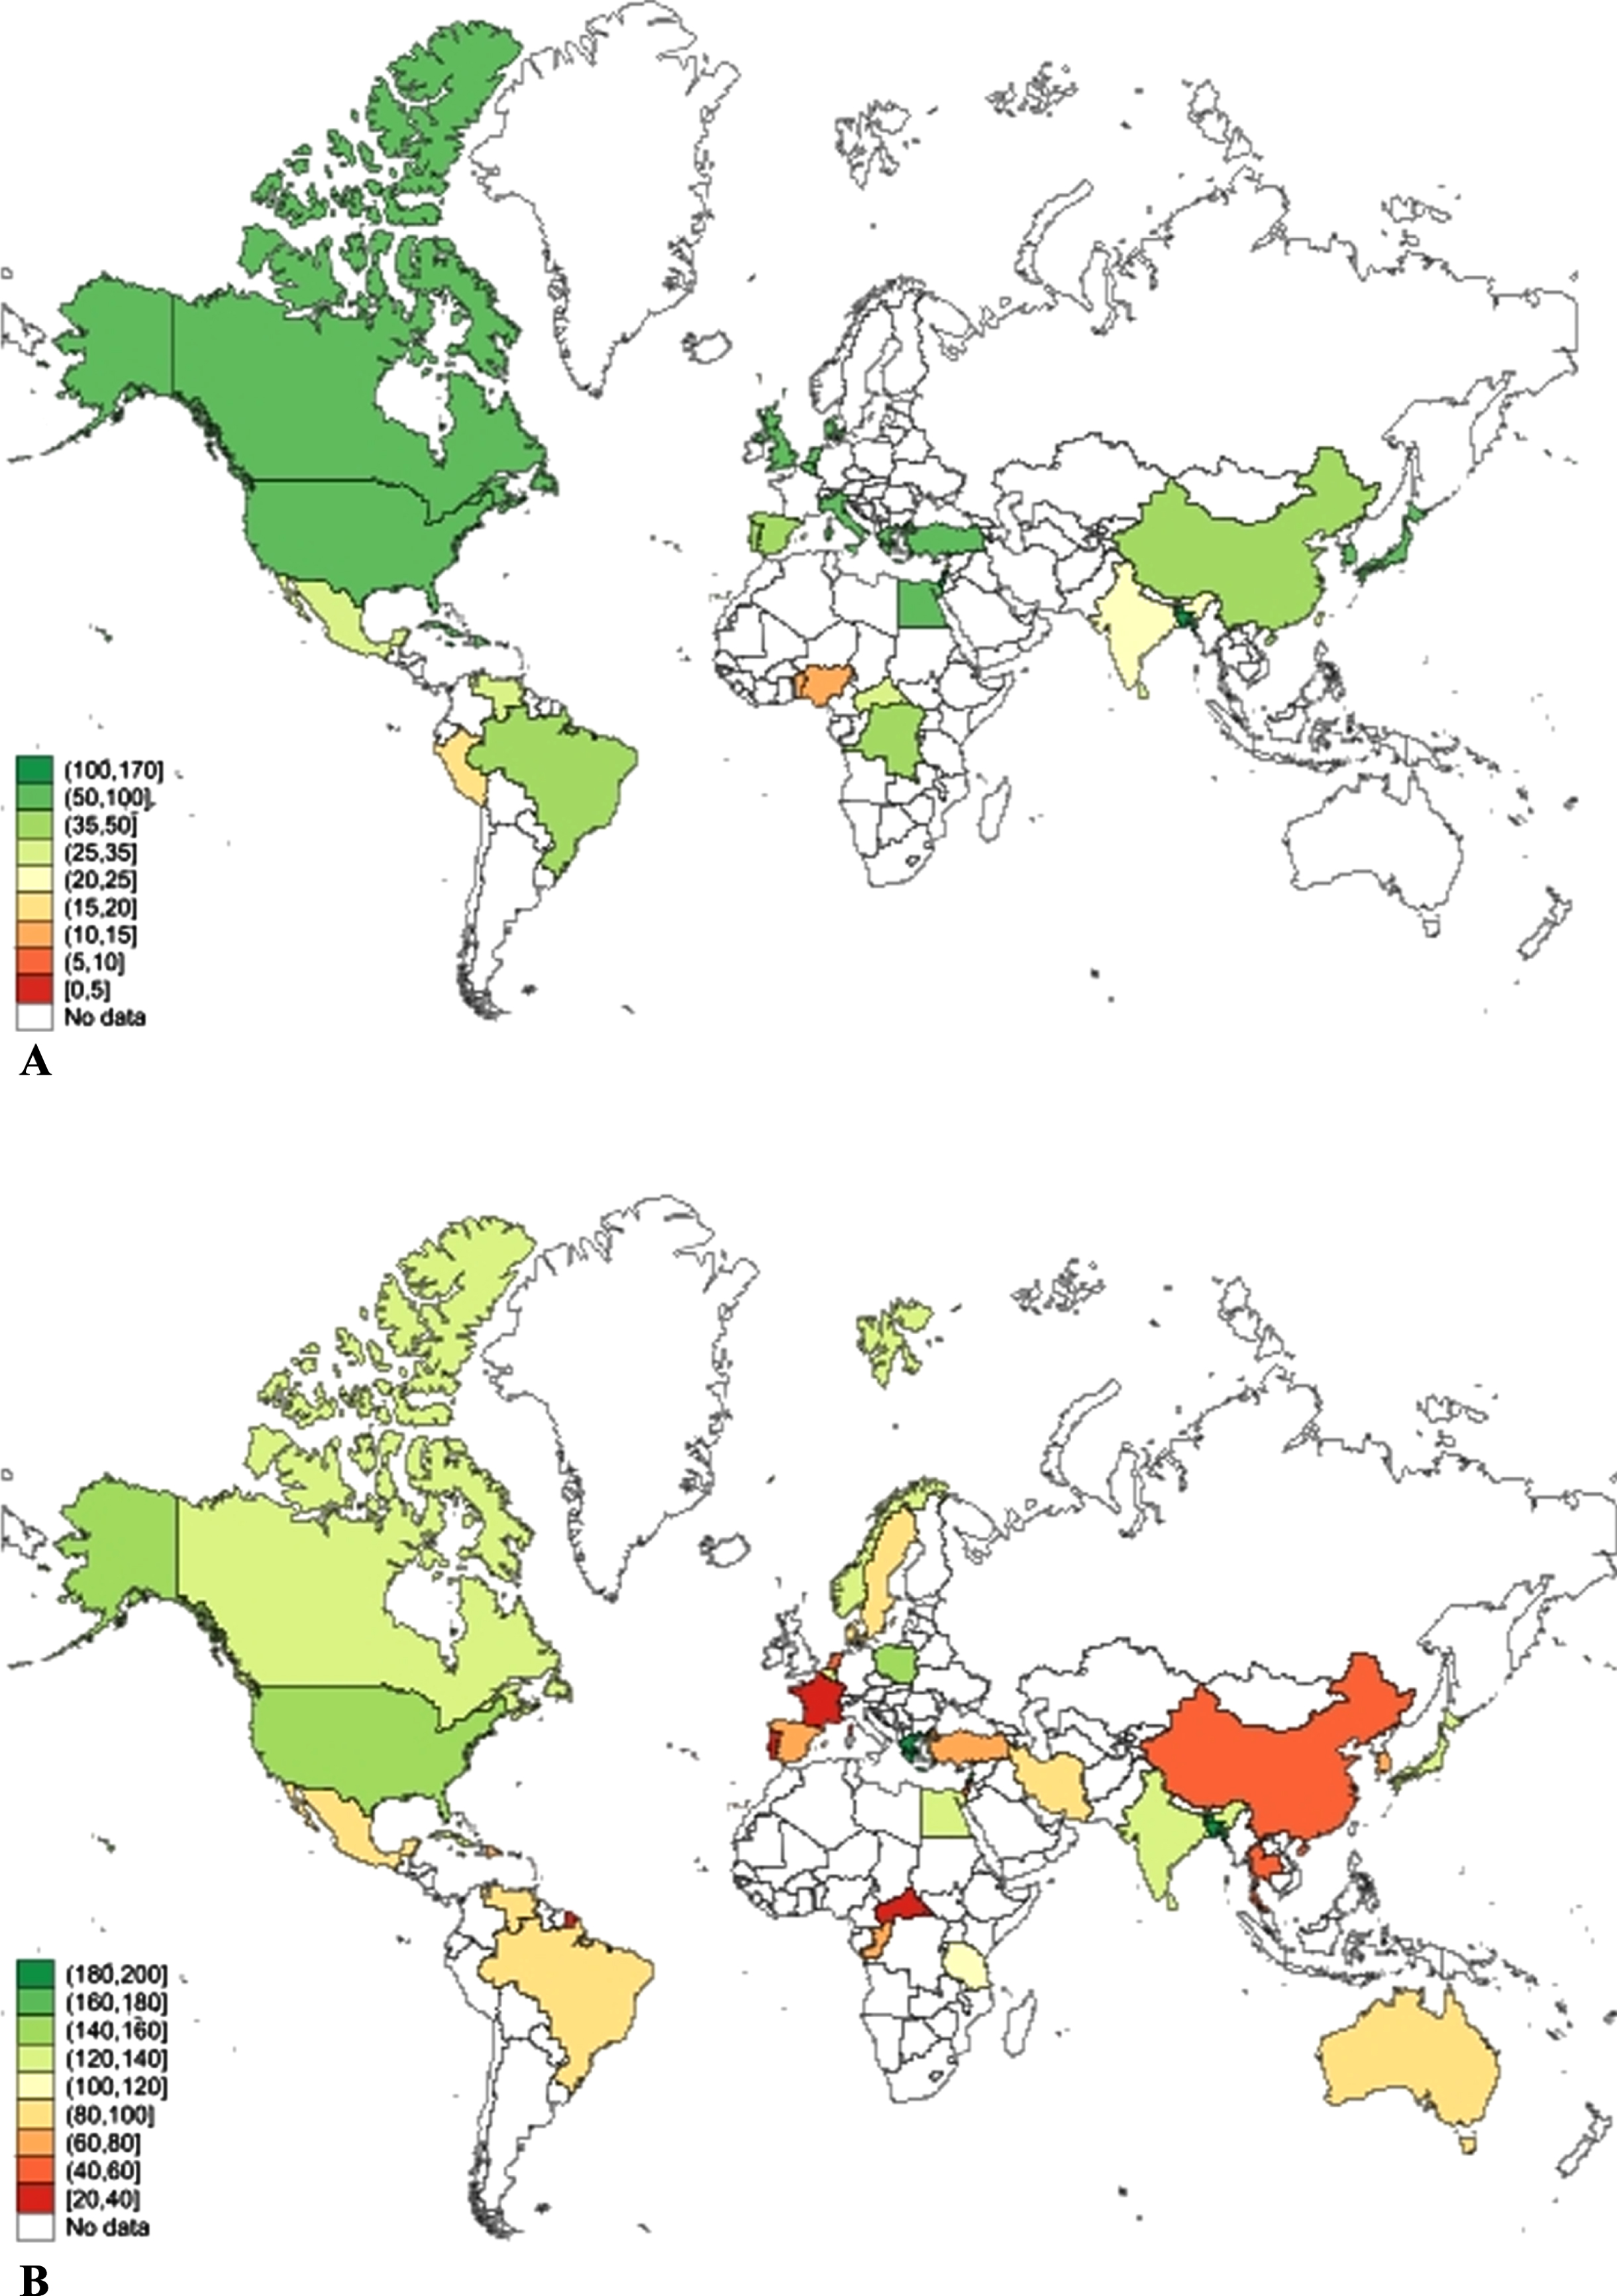 Global prevalence of dementia among persons (A) aged 65 years and older, and (B) aged 75 years and older, by country.